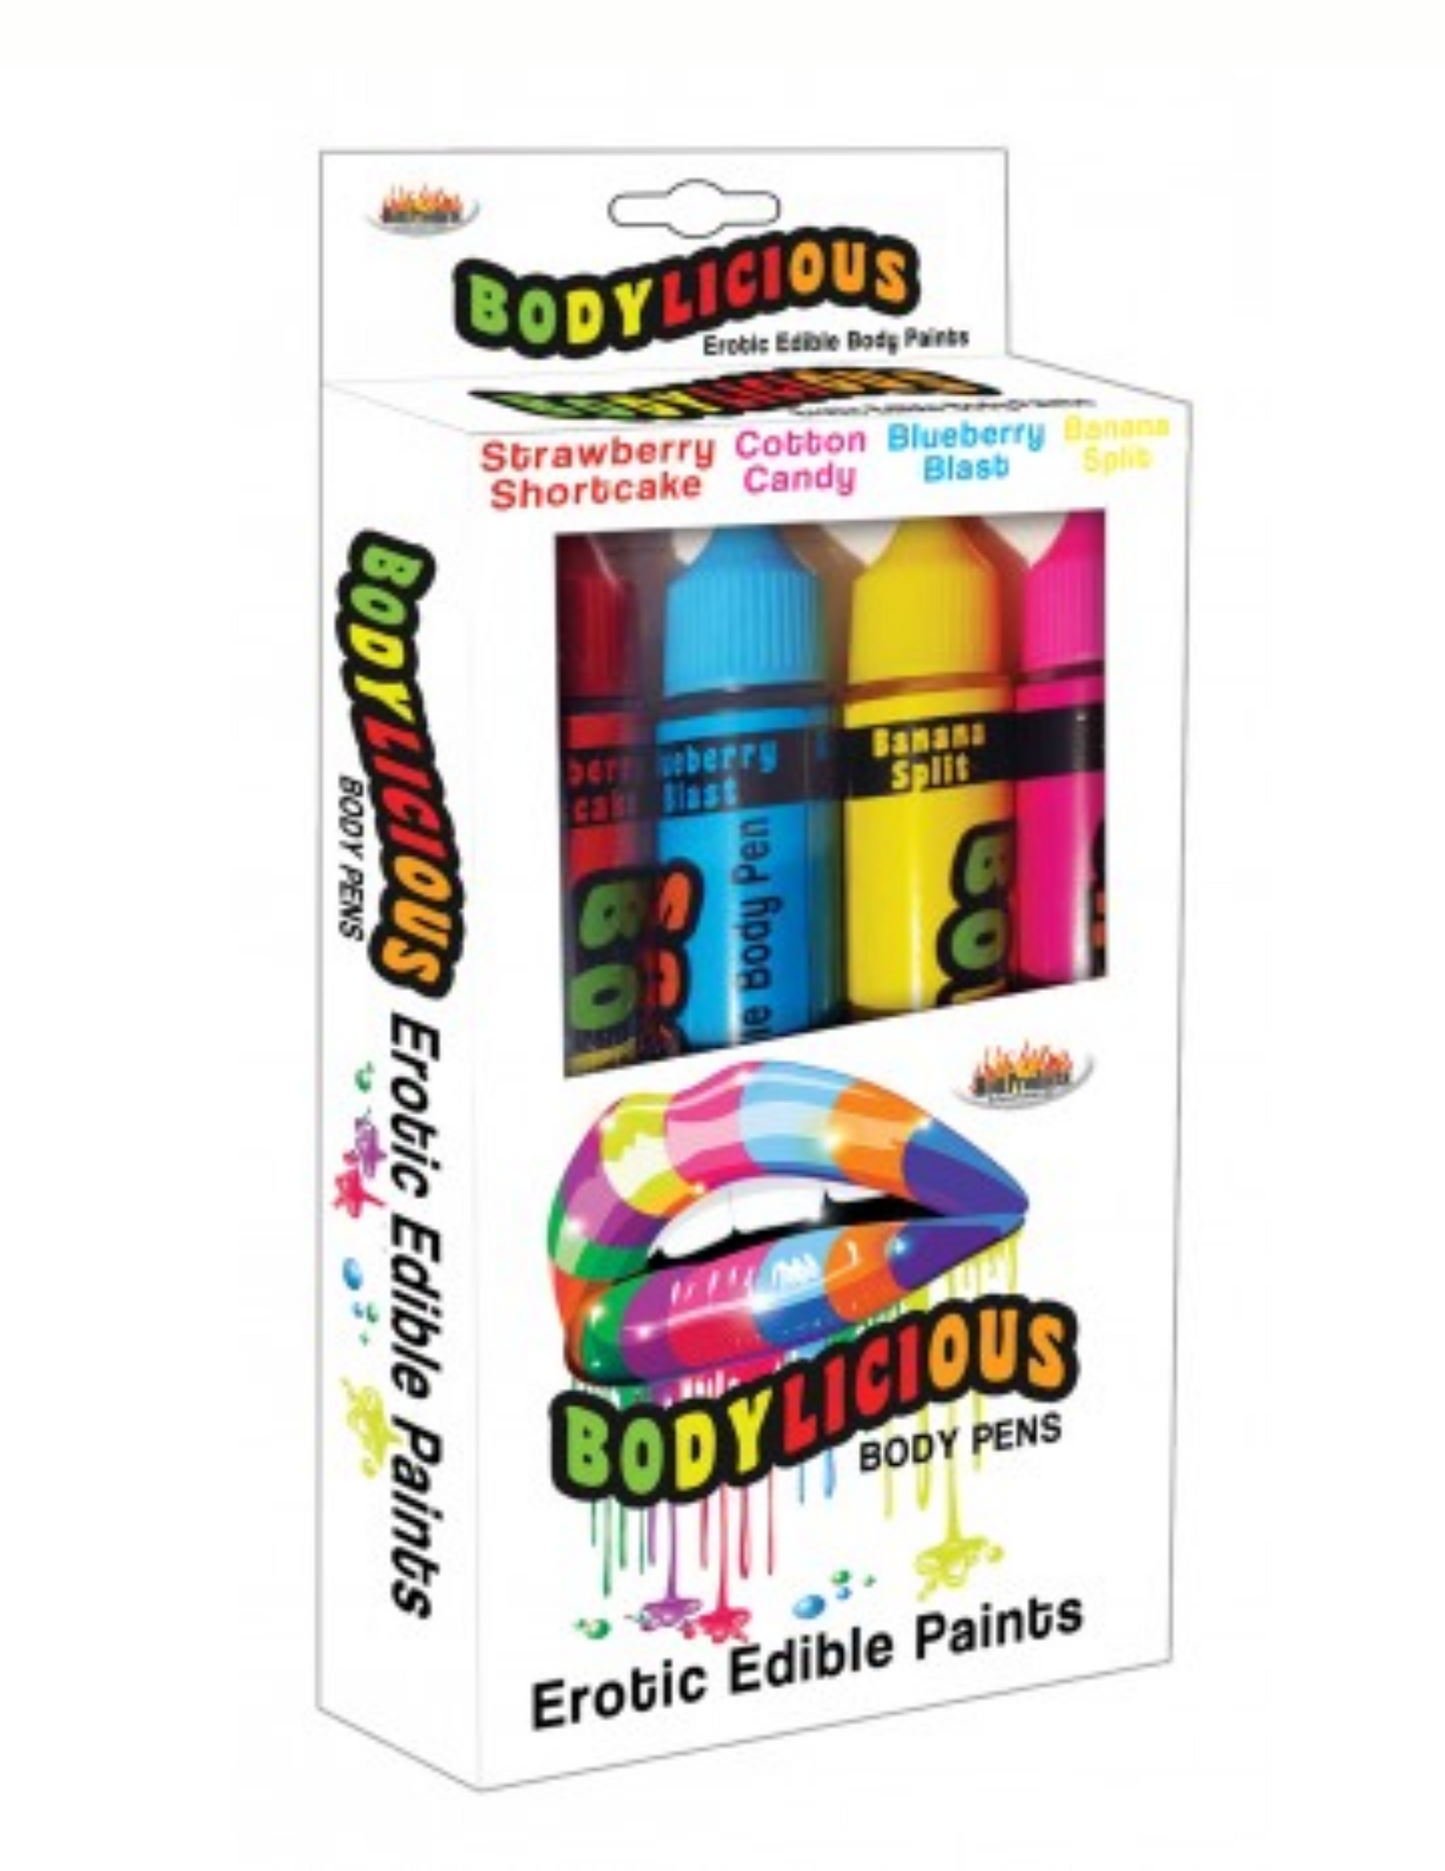 Bodylicious Erotic Edible Paints in their box.